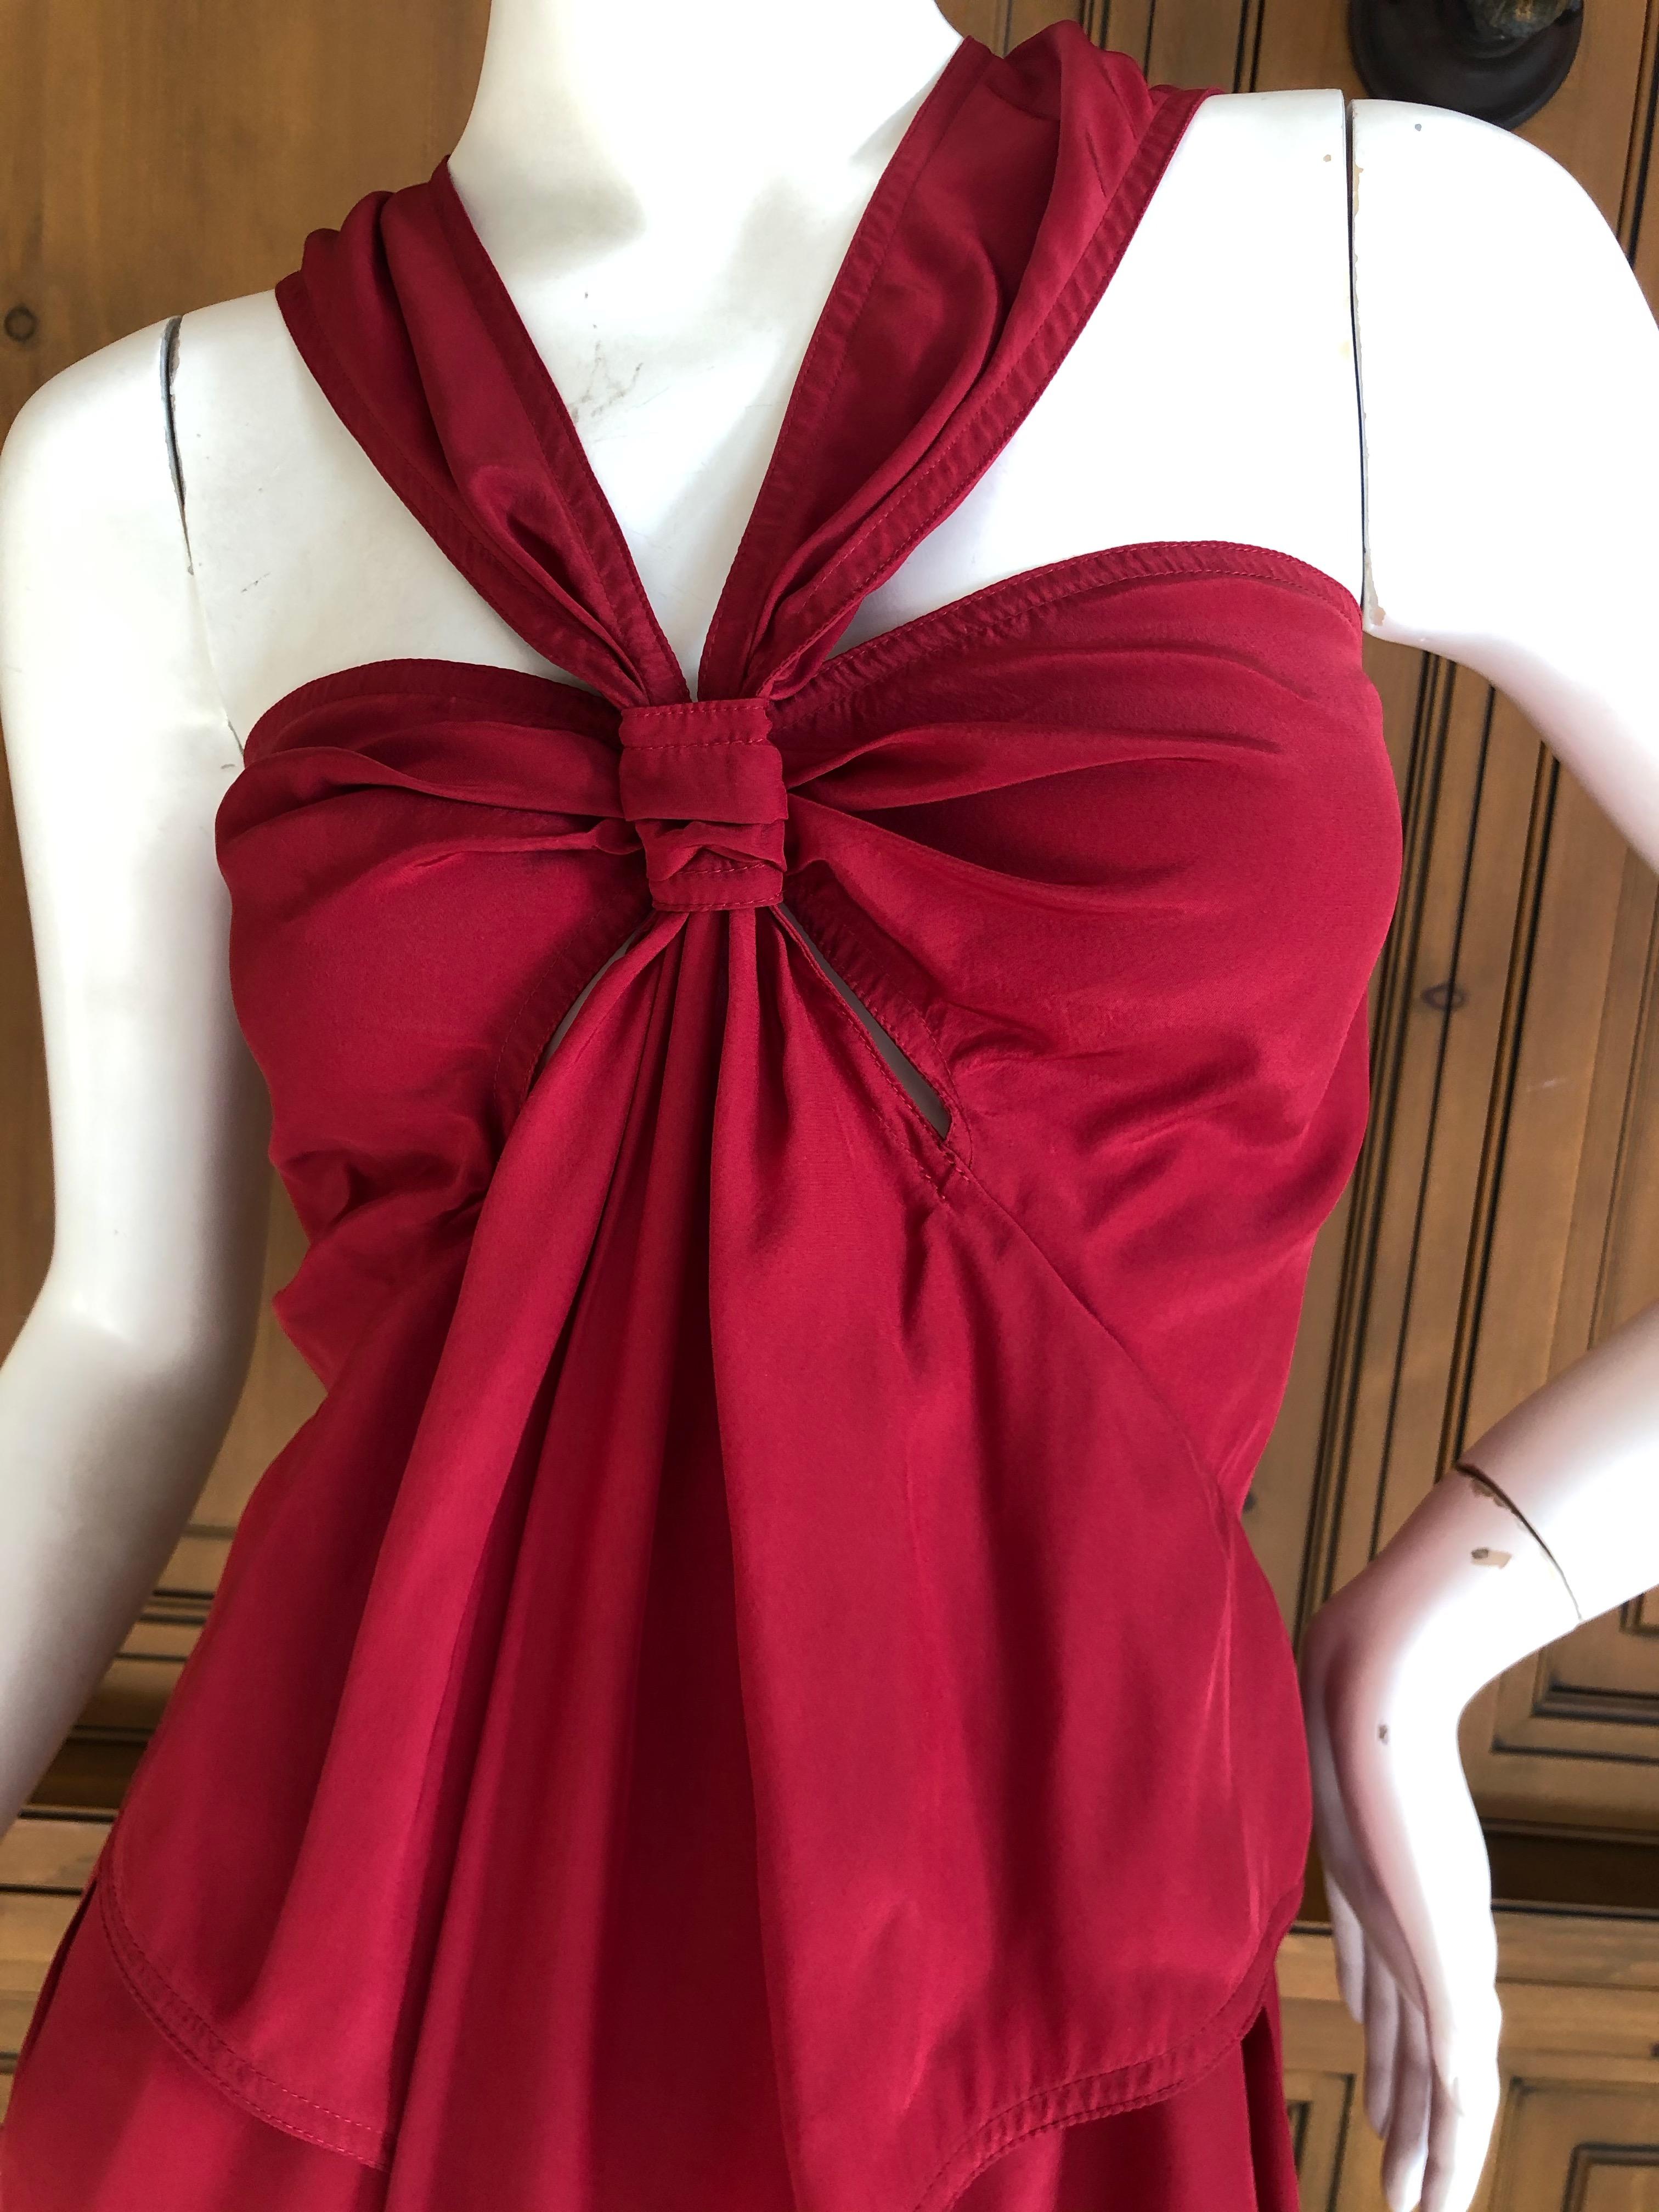 Yves Saint Laurent by Tom Ford Red Silk Keyhole Dress
I'm not certain how to style this, there is a side sash type flap at the hip, I'm not sure I styled correctly.
As seen on Meg Ryan in Harpers Bazaar and in the Tom Ford book.
Size 40
 Bust